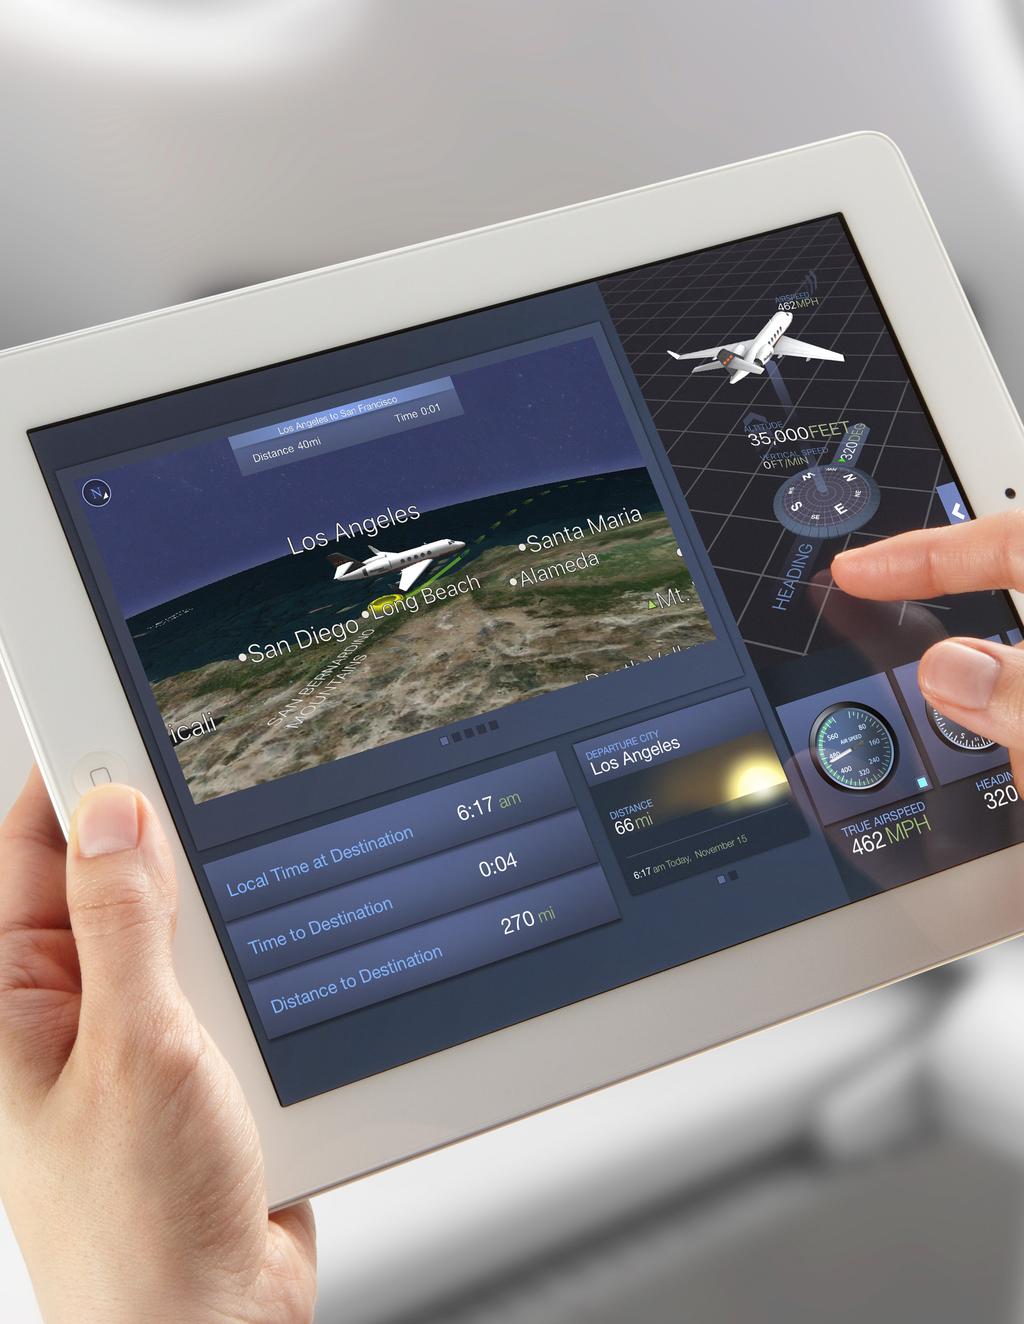 Intuitive control. With Airshow Mobile and Venue Cabin Remote apps for ios and Android devices, you can command your system from anywhere in your cabin.